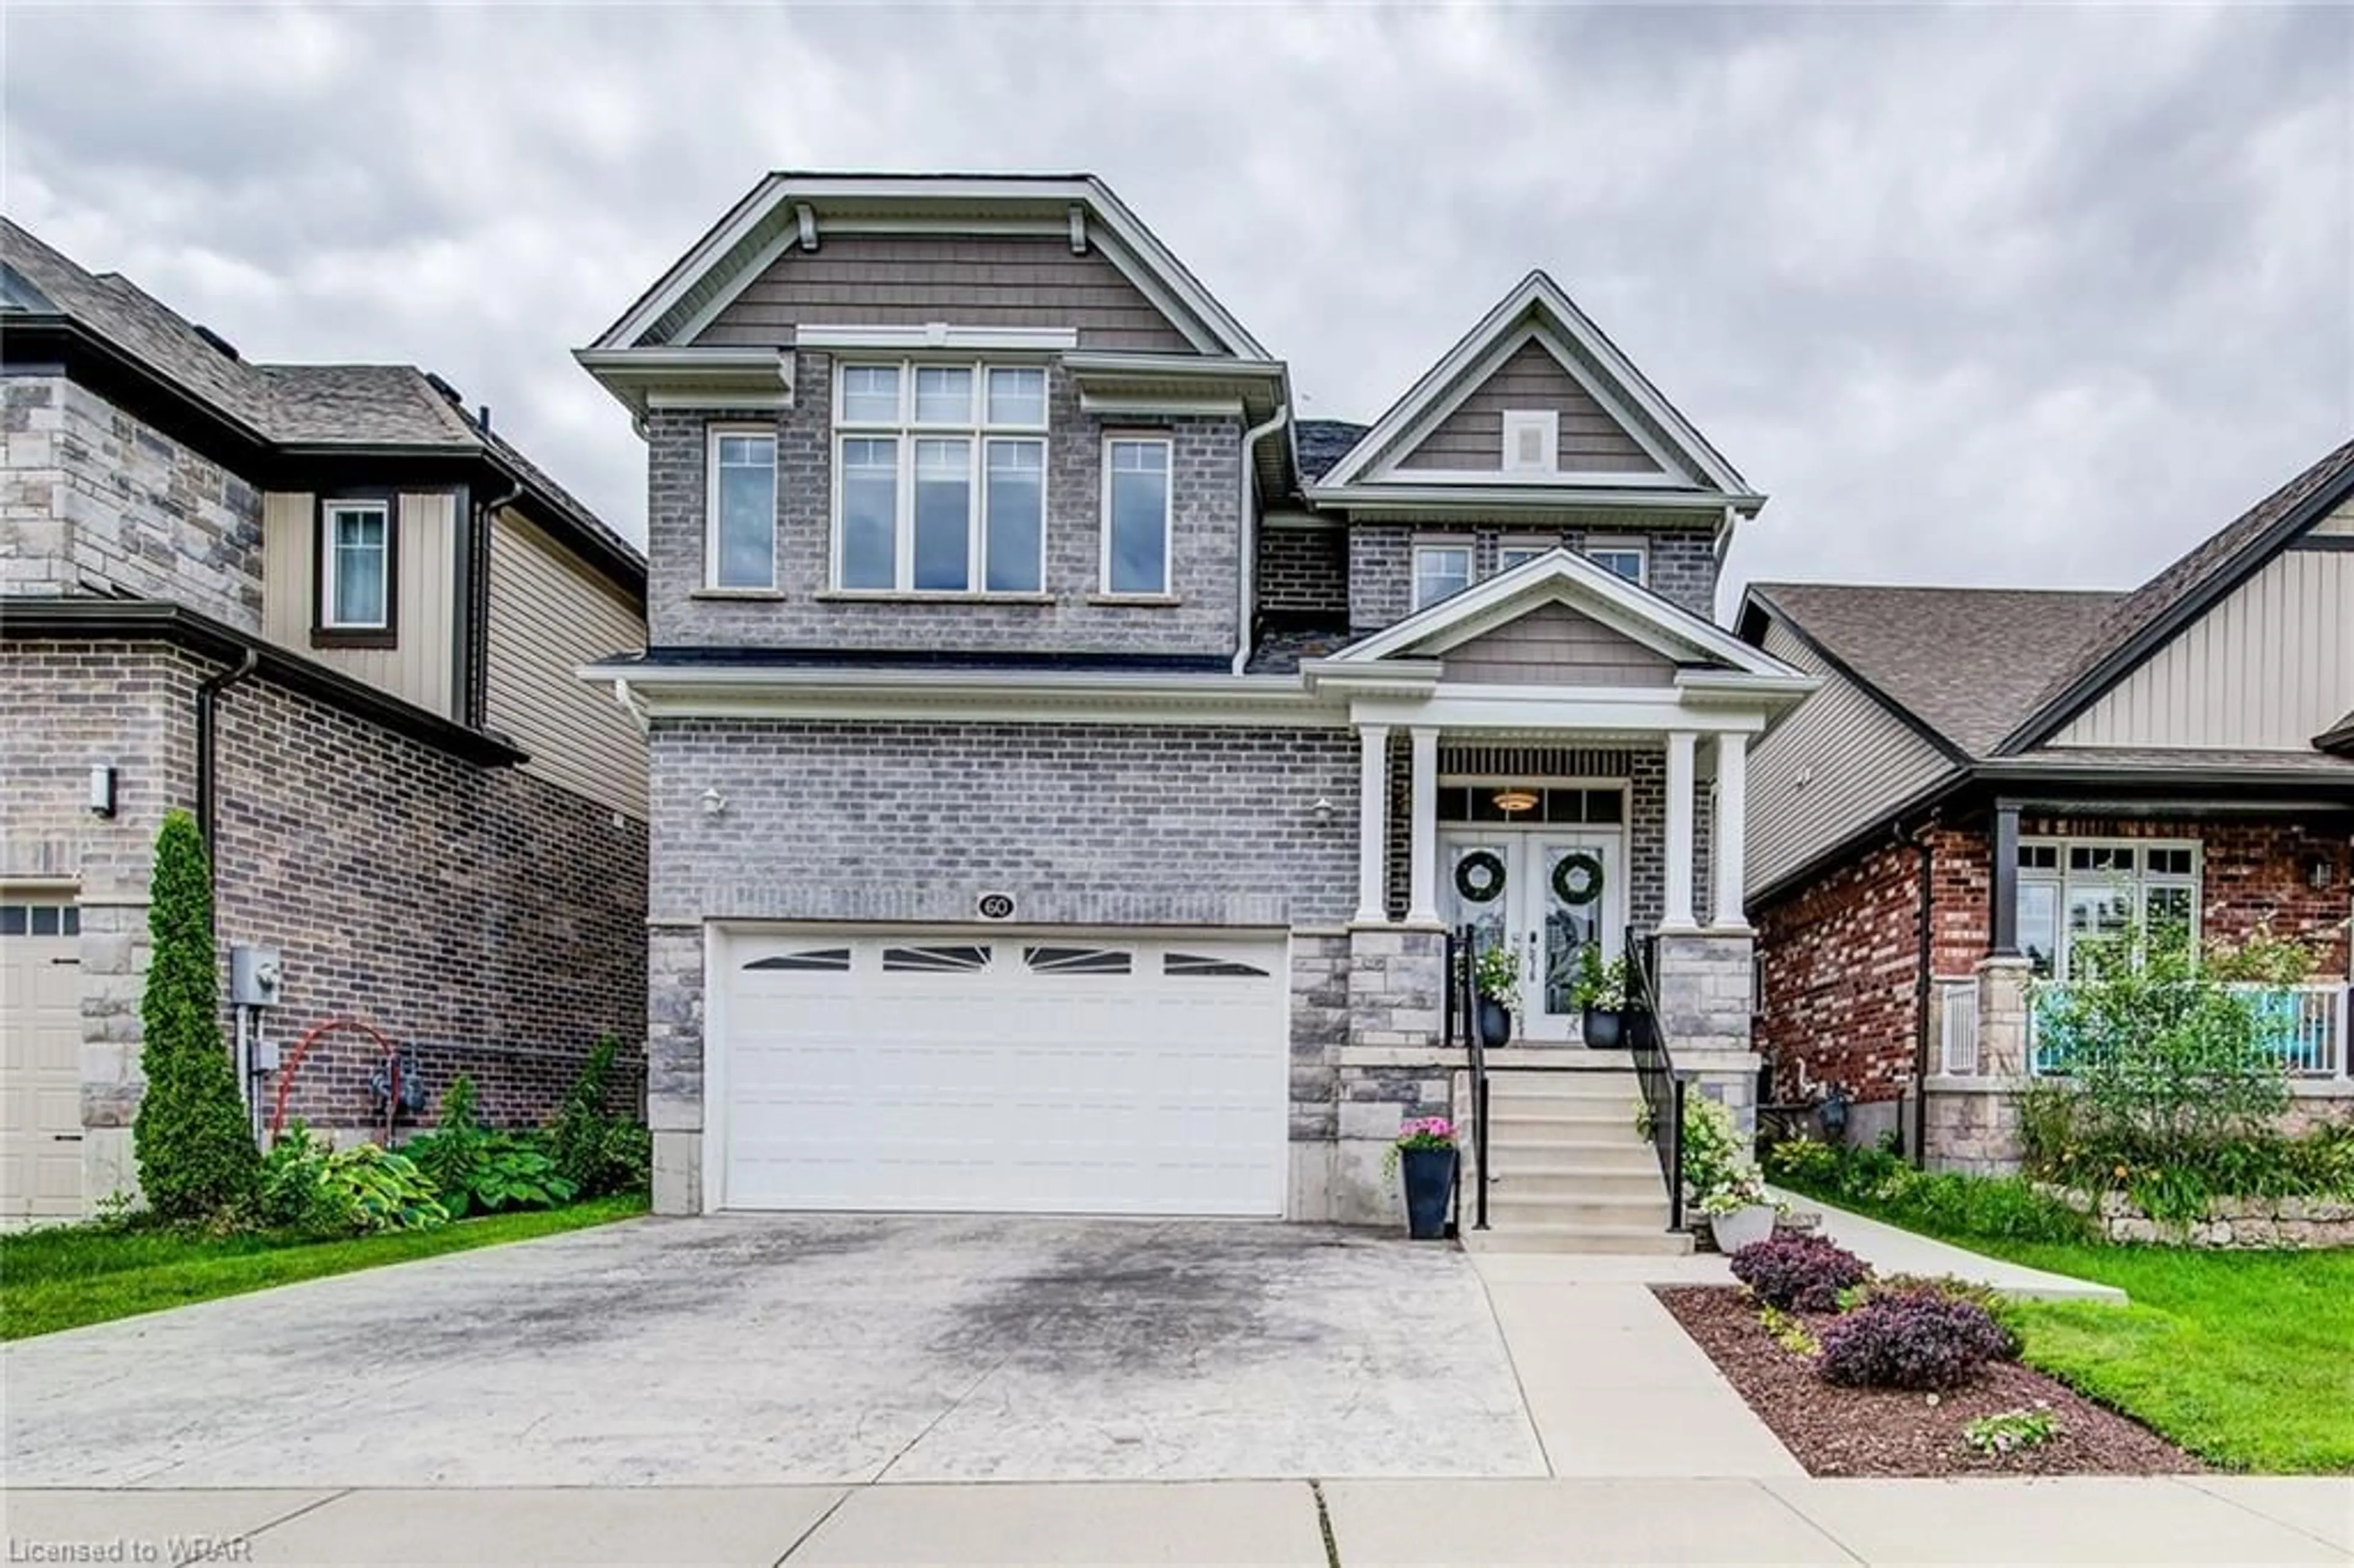 Home with brick exterior material for 60 Fraserwood Crt, Cambridge Ontario N1S 0B3